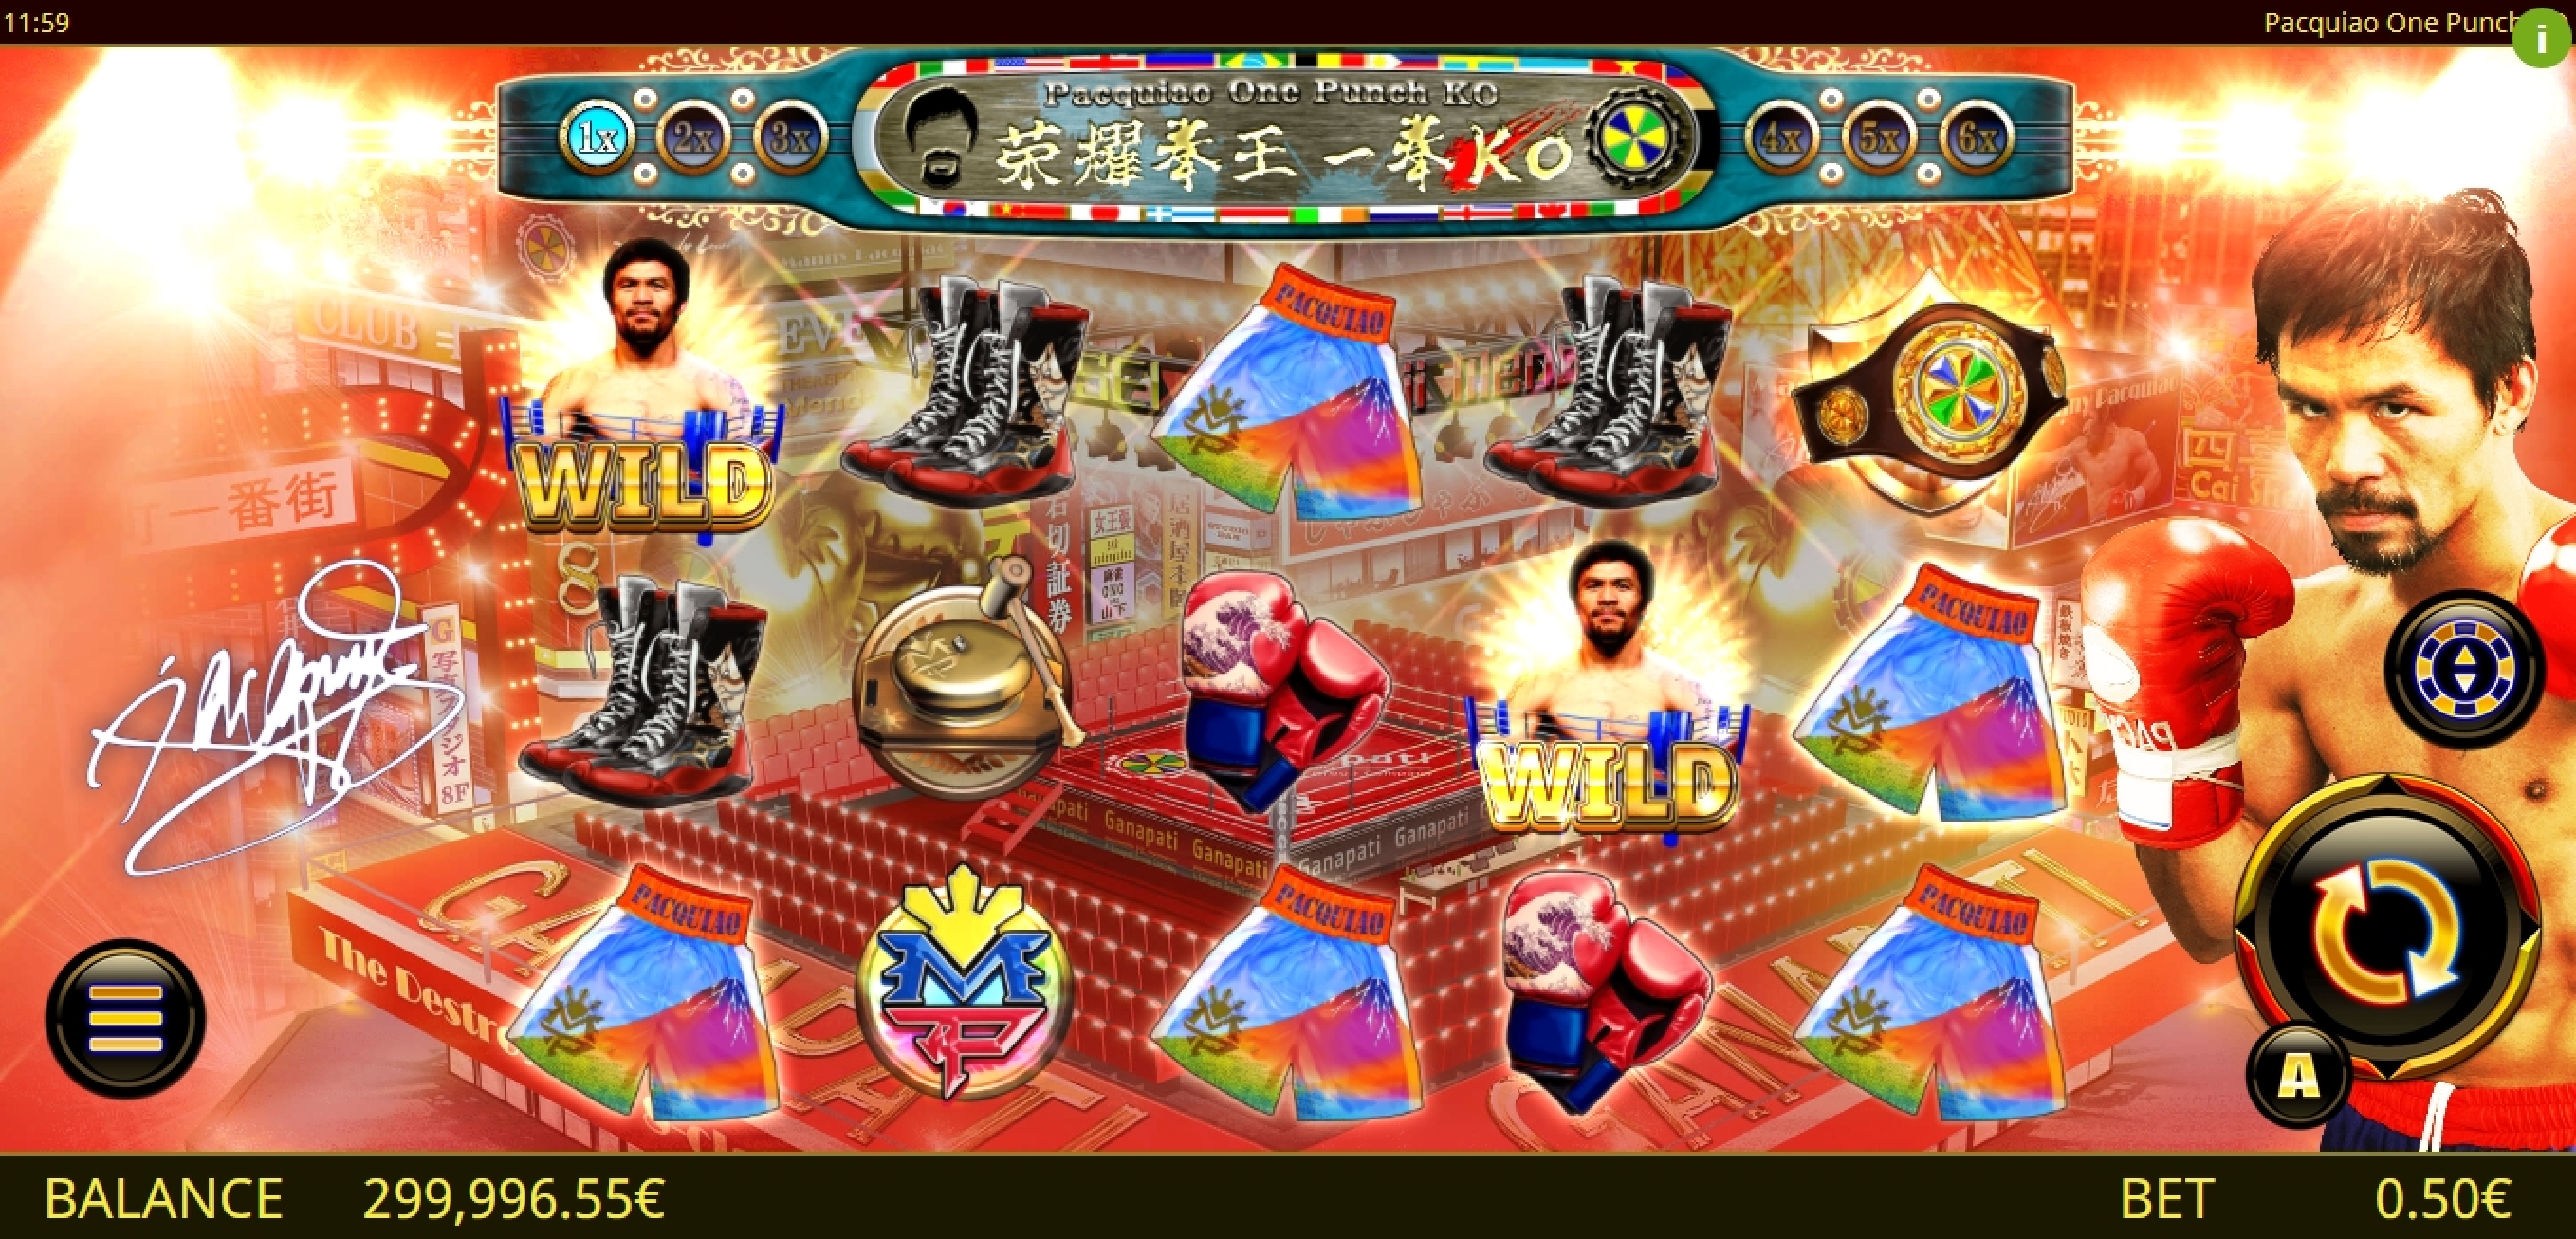 Reels in Pacquiao One Punch KO Slot Game by Ganapati